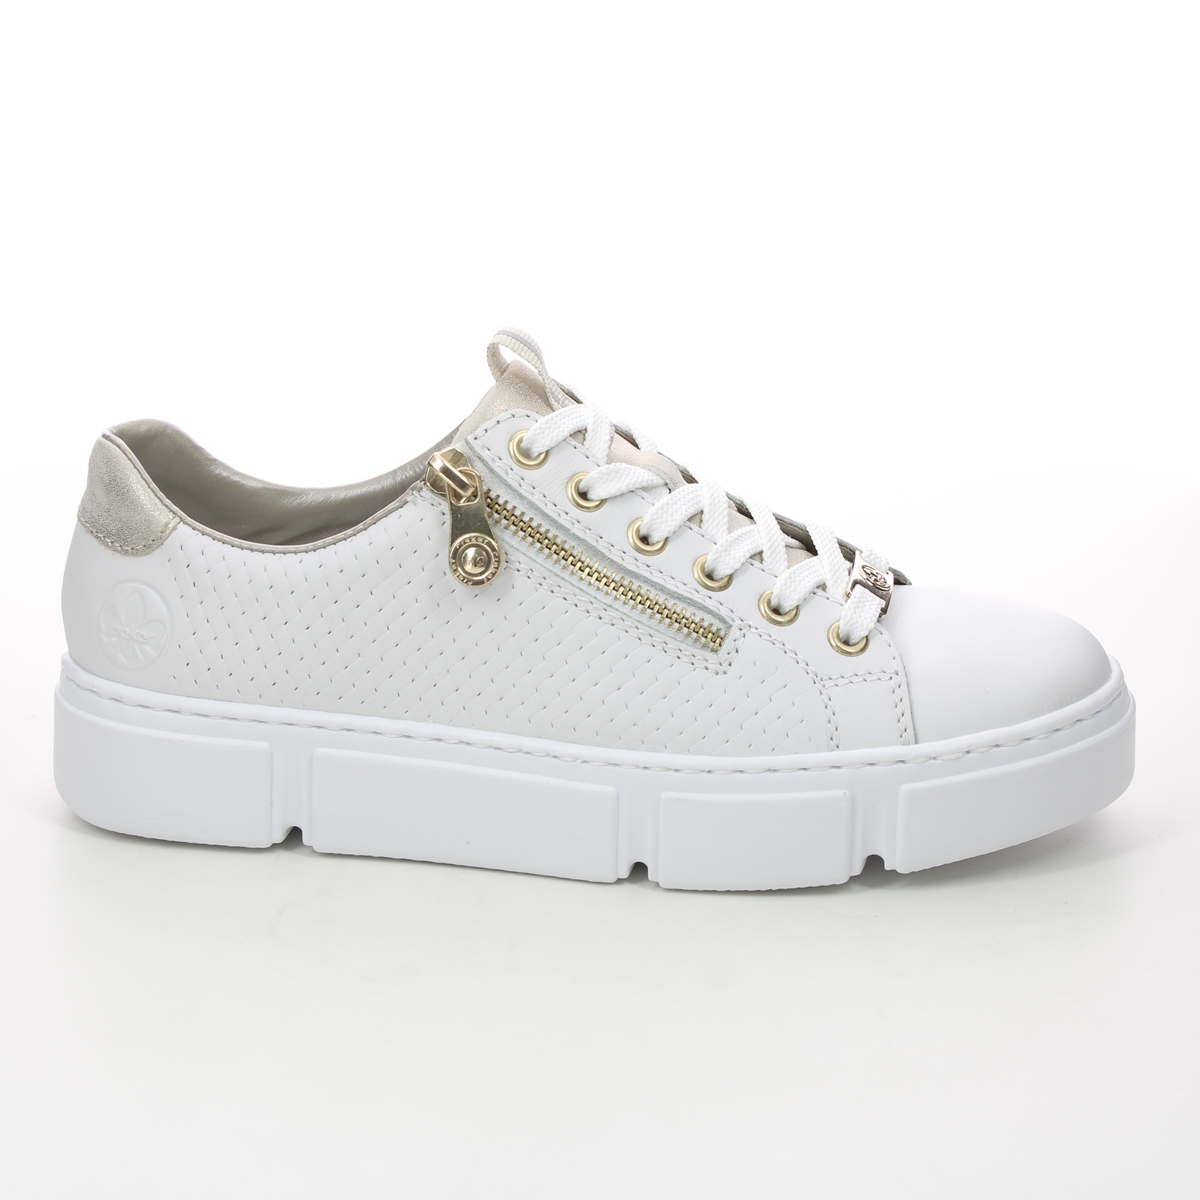 Rieker N5932-80 WHITE LEATHER Womens trainers